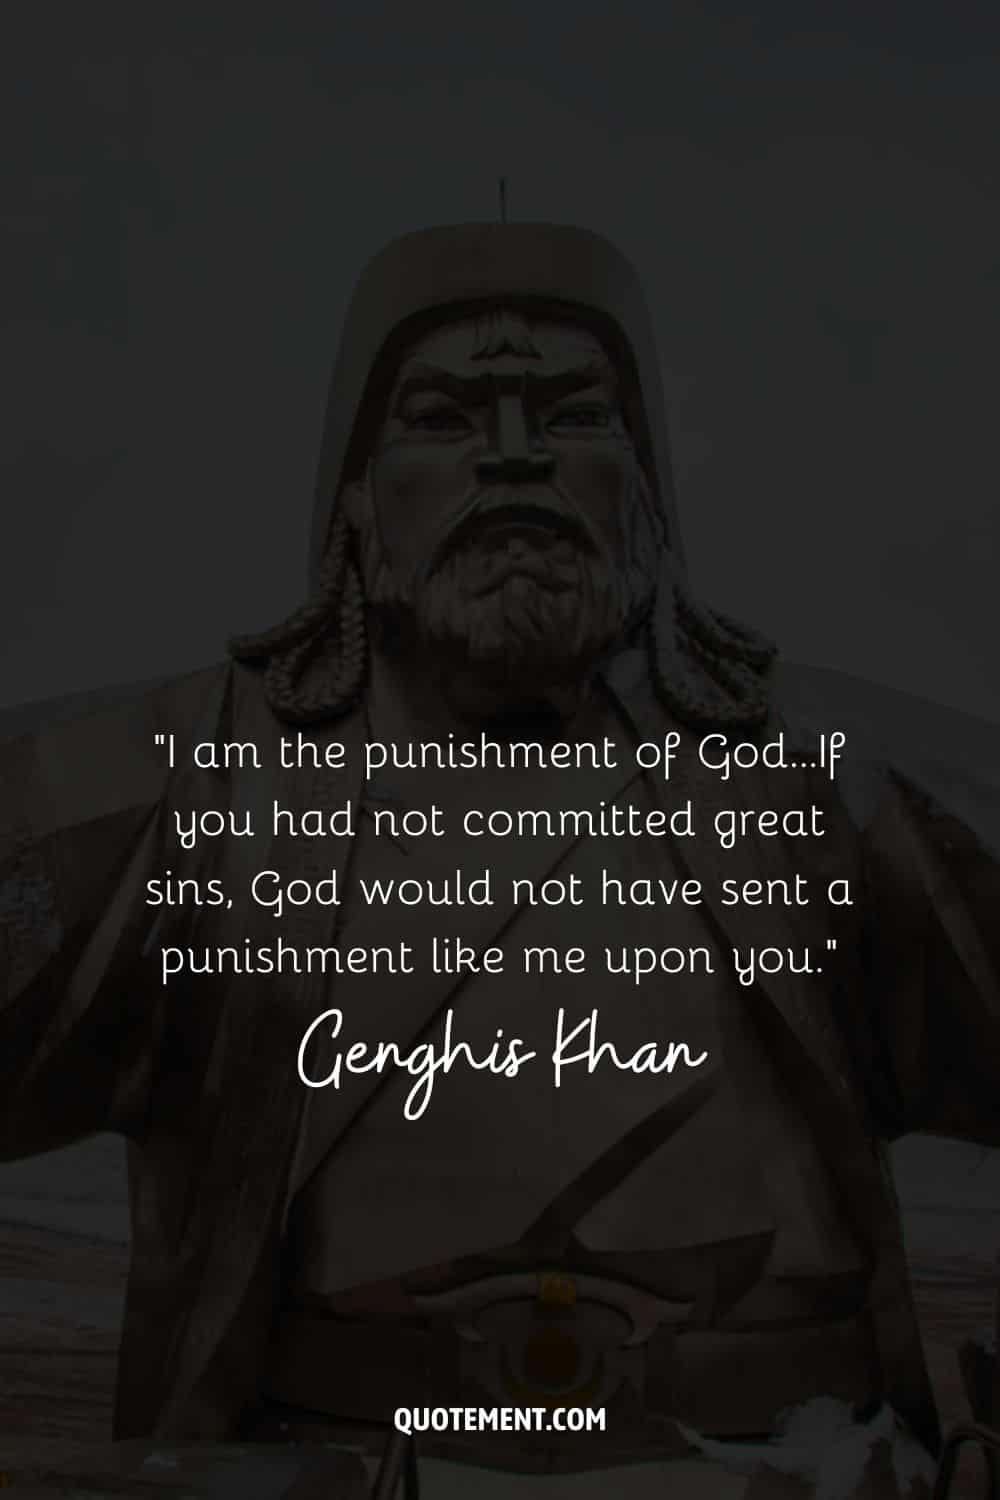 I am the punishment of God...If you had not committed great sins, God would not have sent a punishment like me upon you